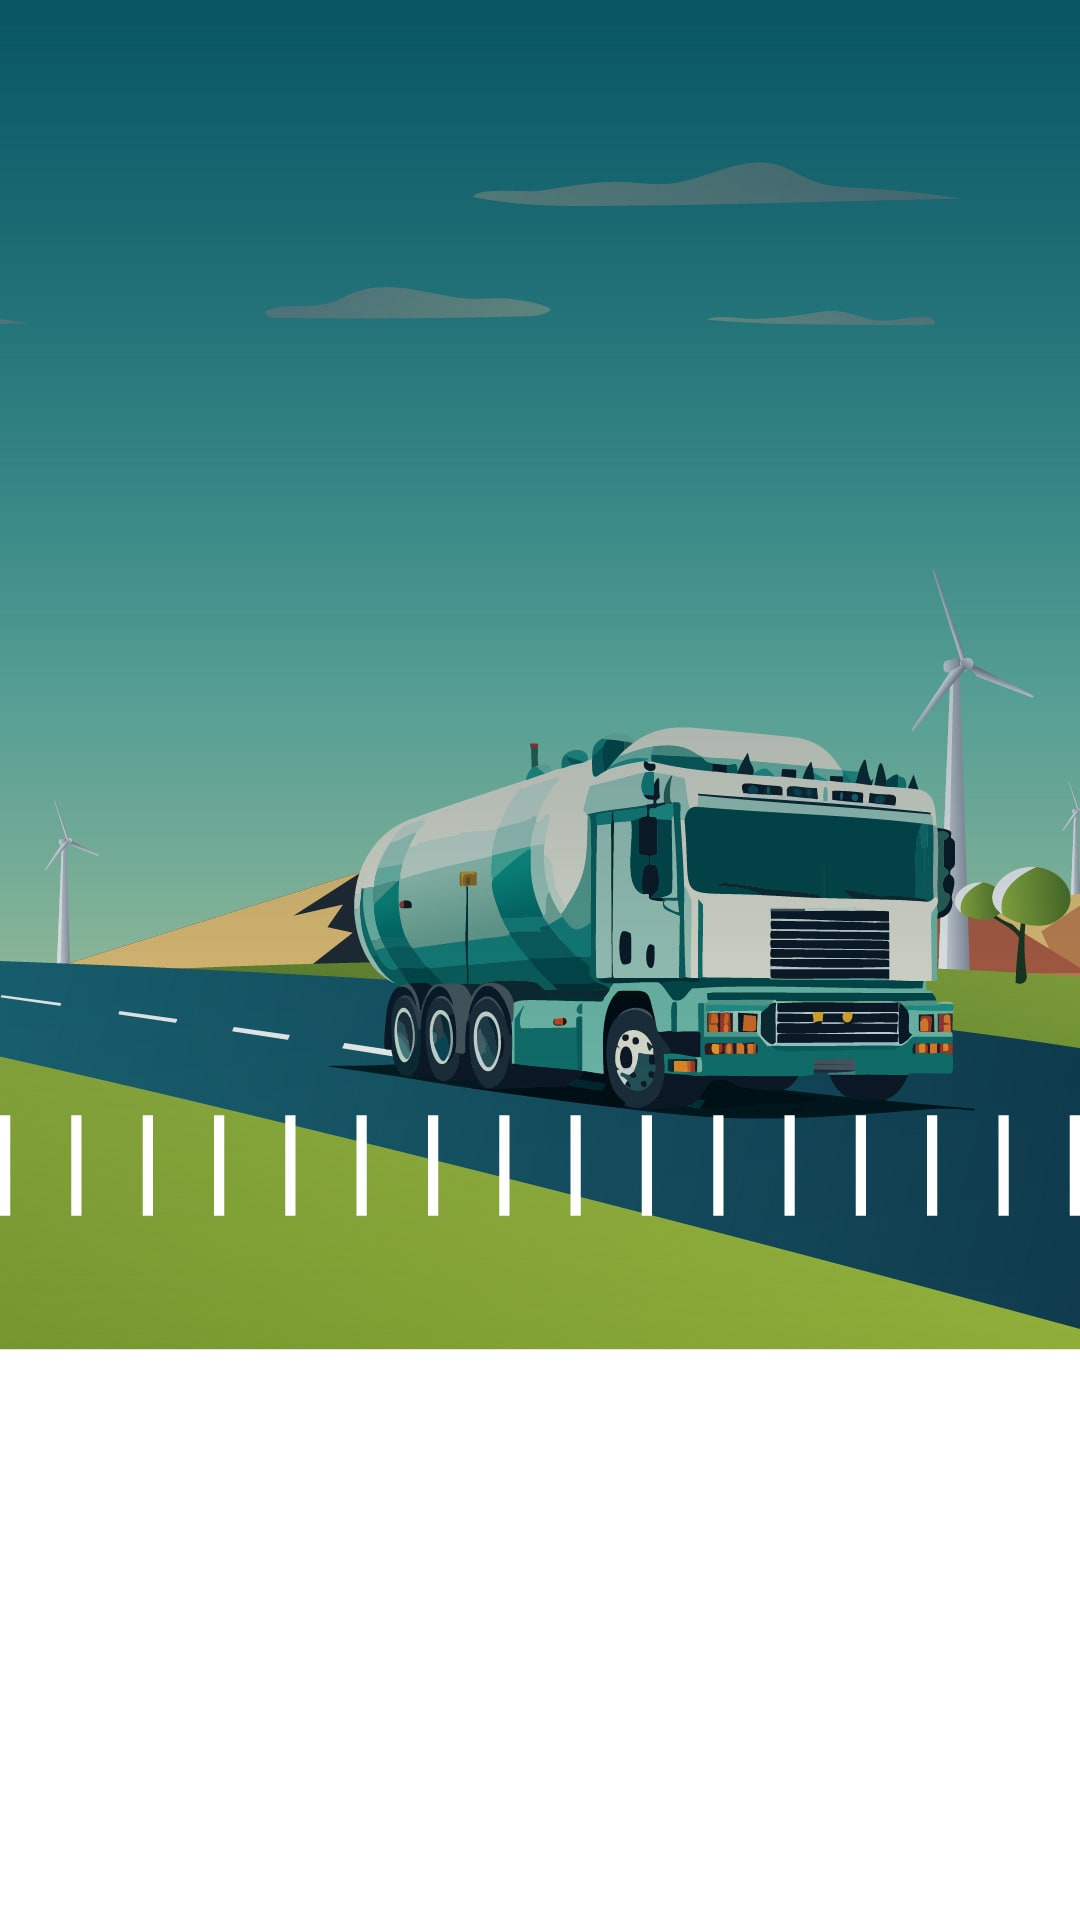 Linking Efficiency to Logistics With #EnergyTransitionNow